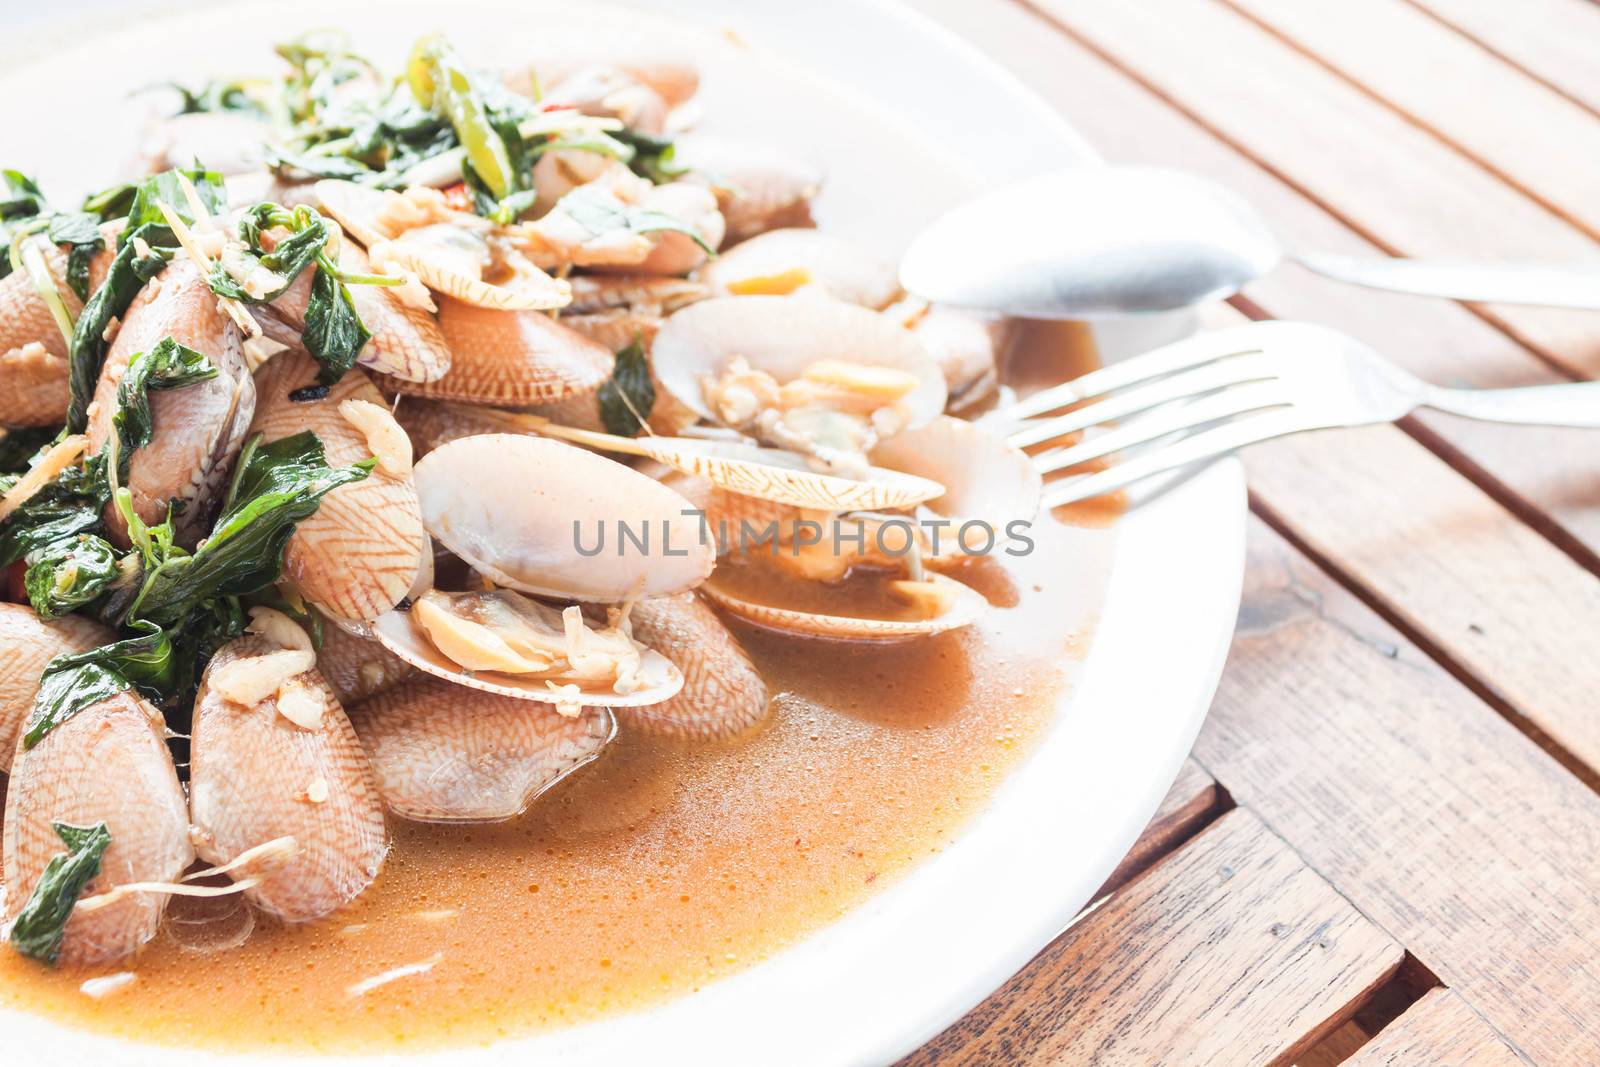 Stir fried clams with roasted chili paste on wooden table